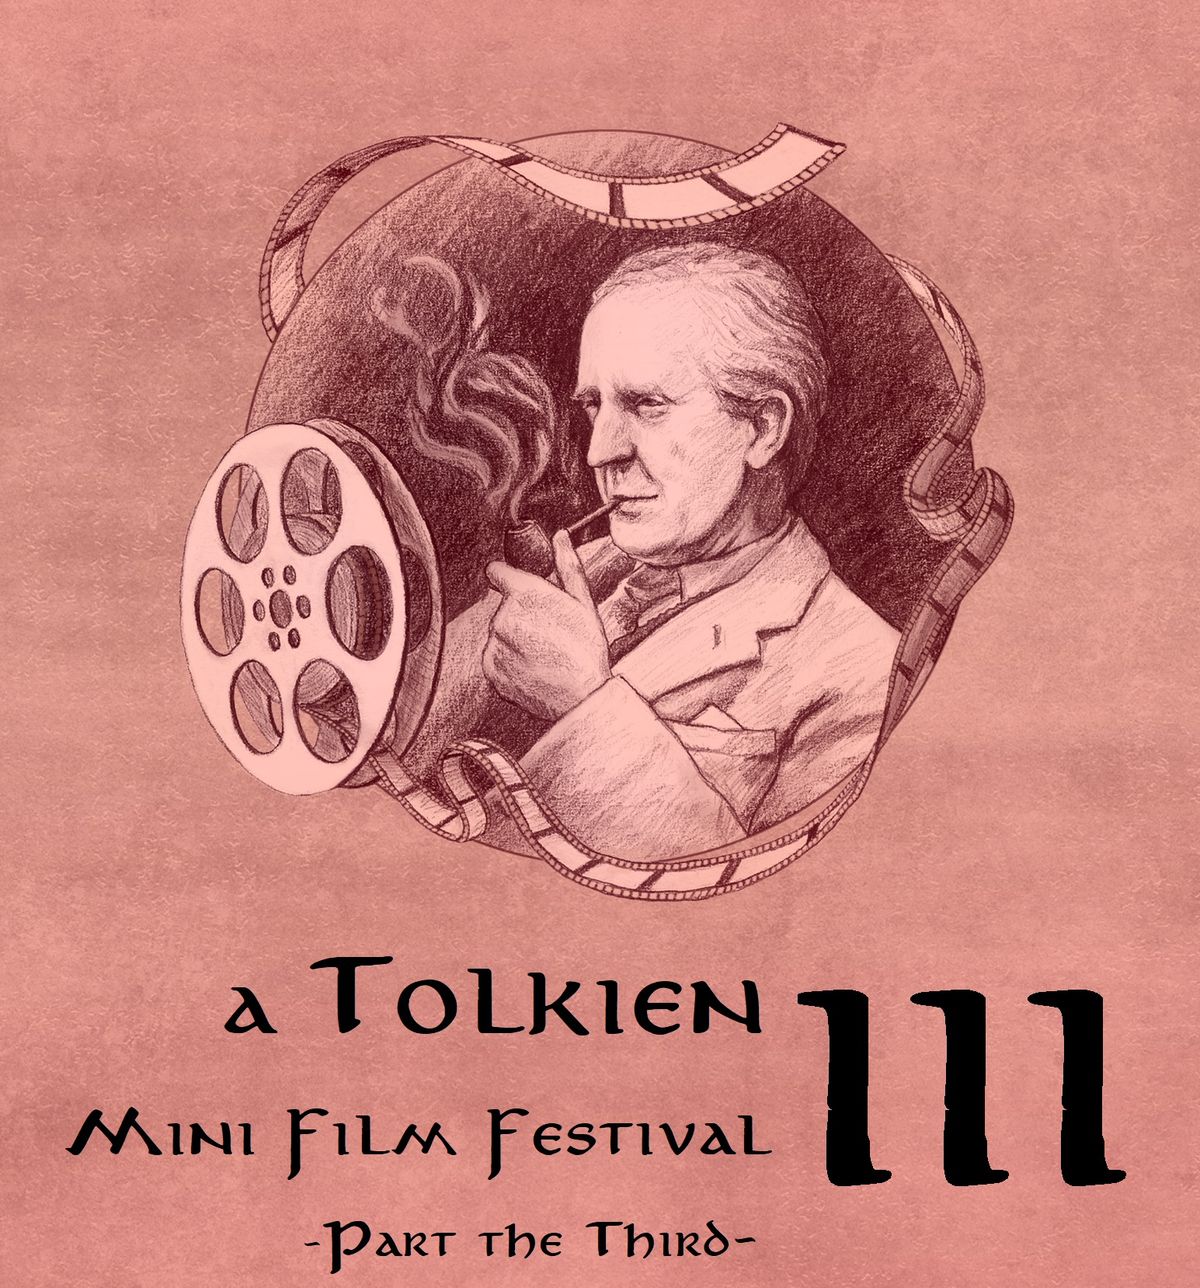 A Tolkien Mini Film Festival III: Presented by The Council of Westmarch